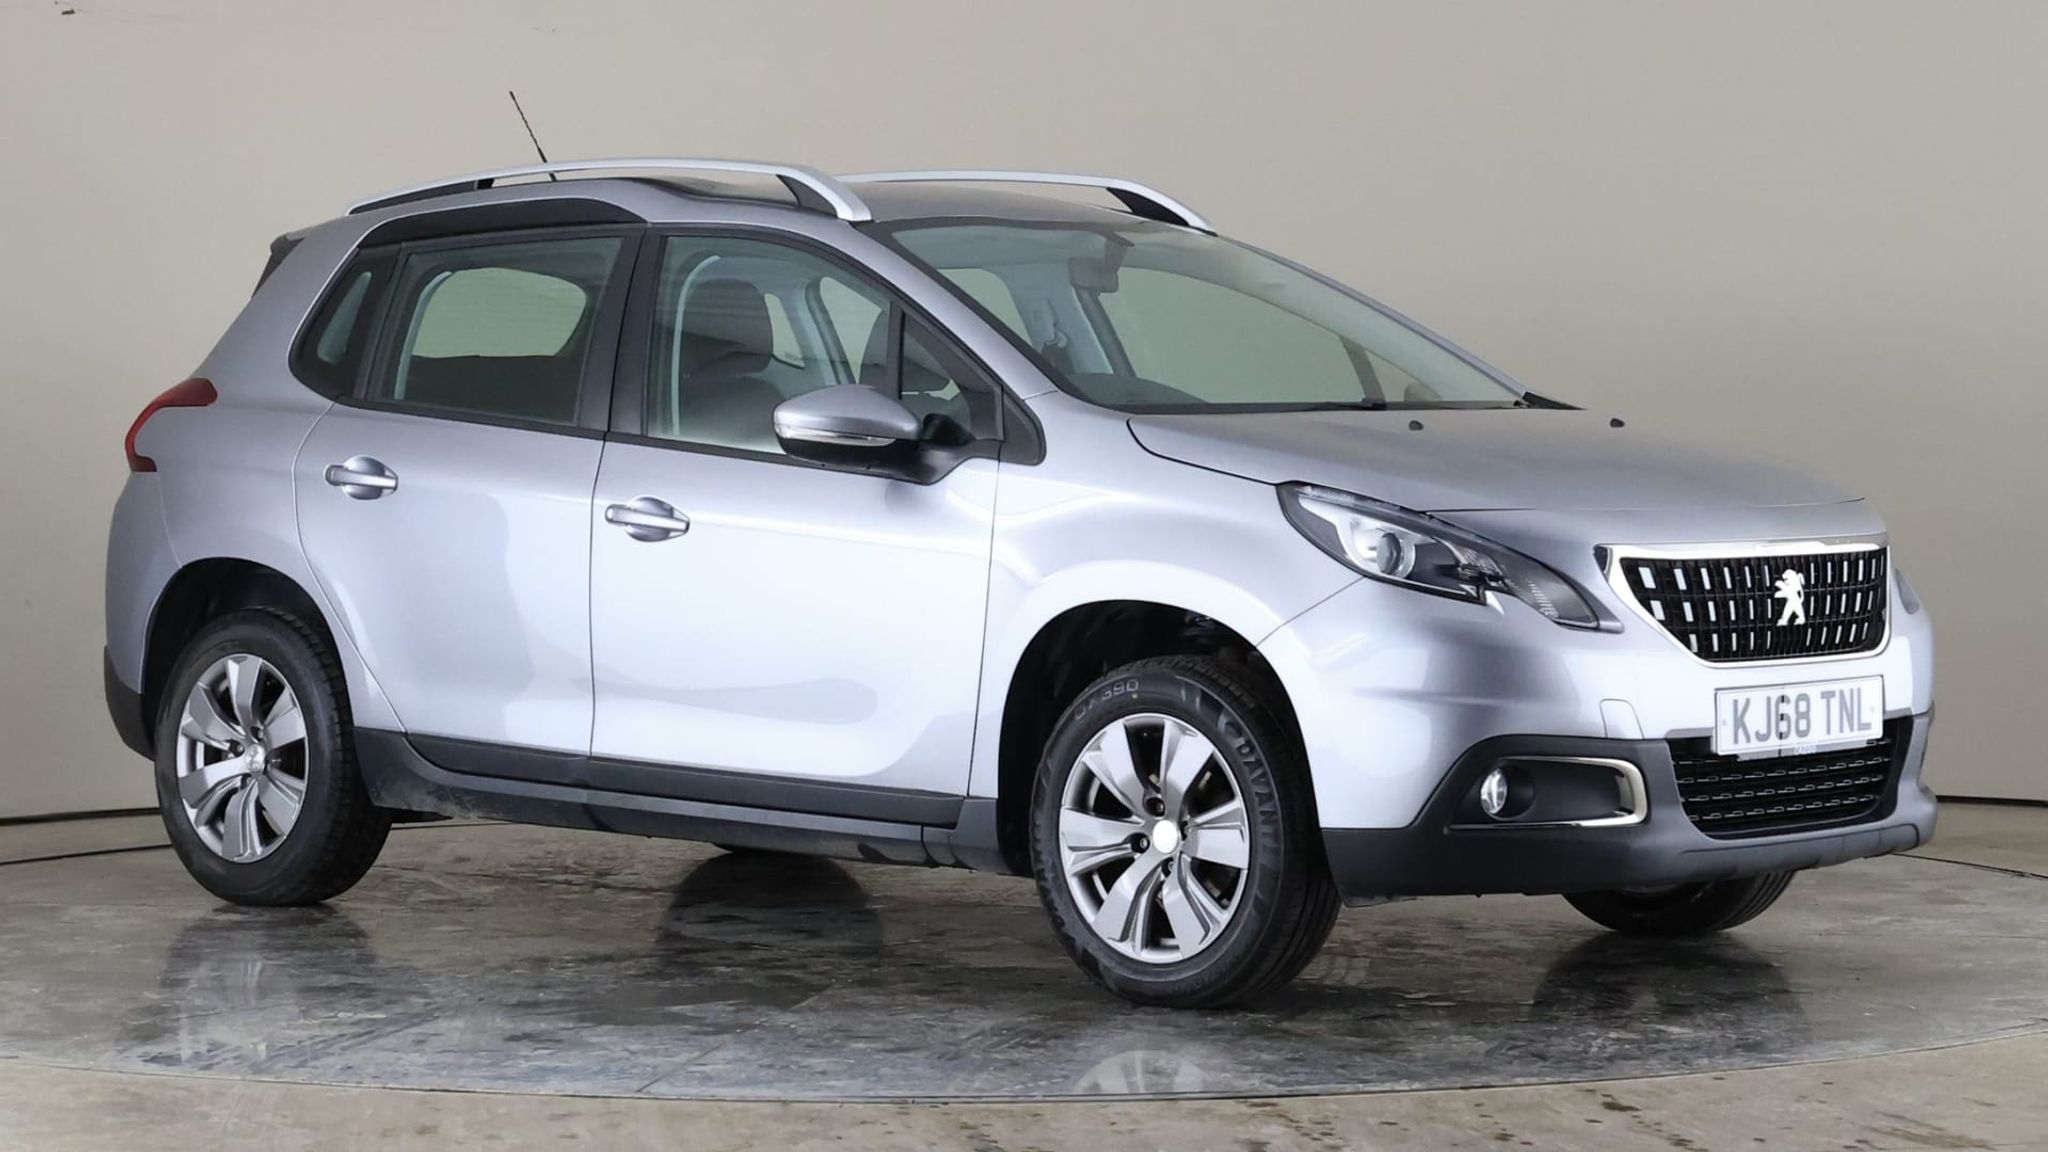 2019 used Peugeot 2008 1.2 PureTech Active (82 ps)